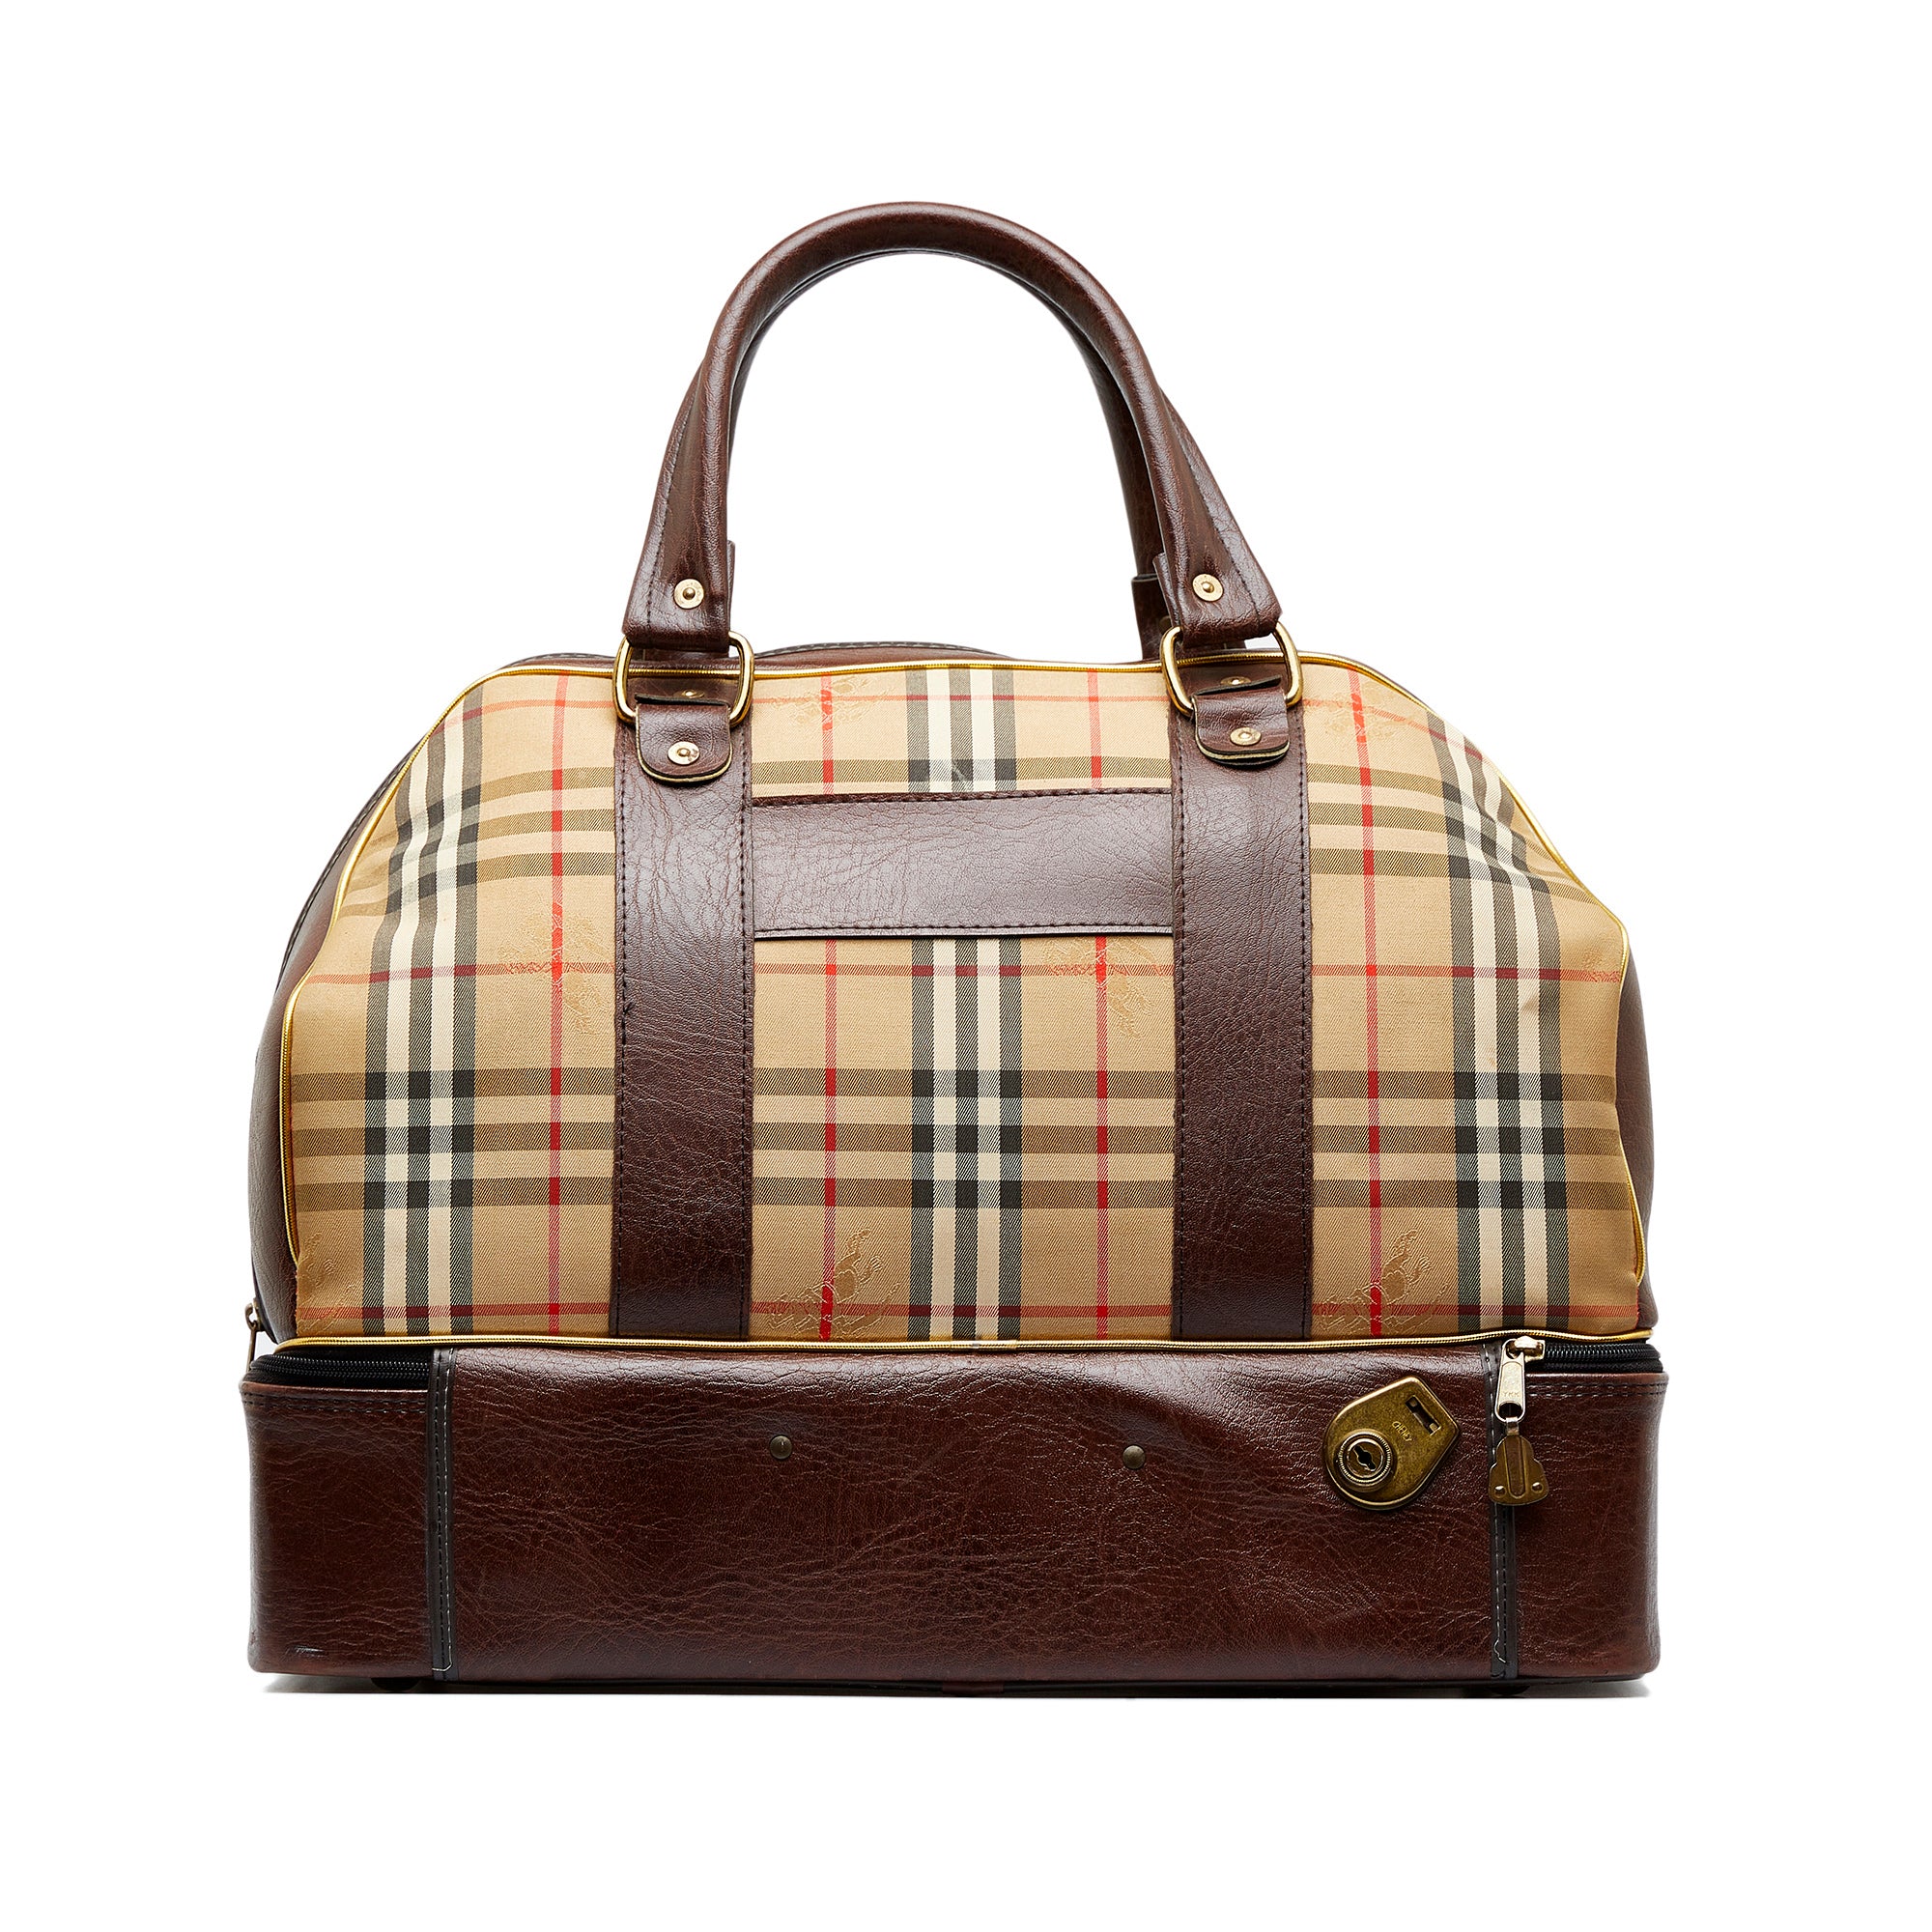 Burberry Haymarket Check Bowling Bag in Very Good Condition